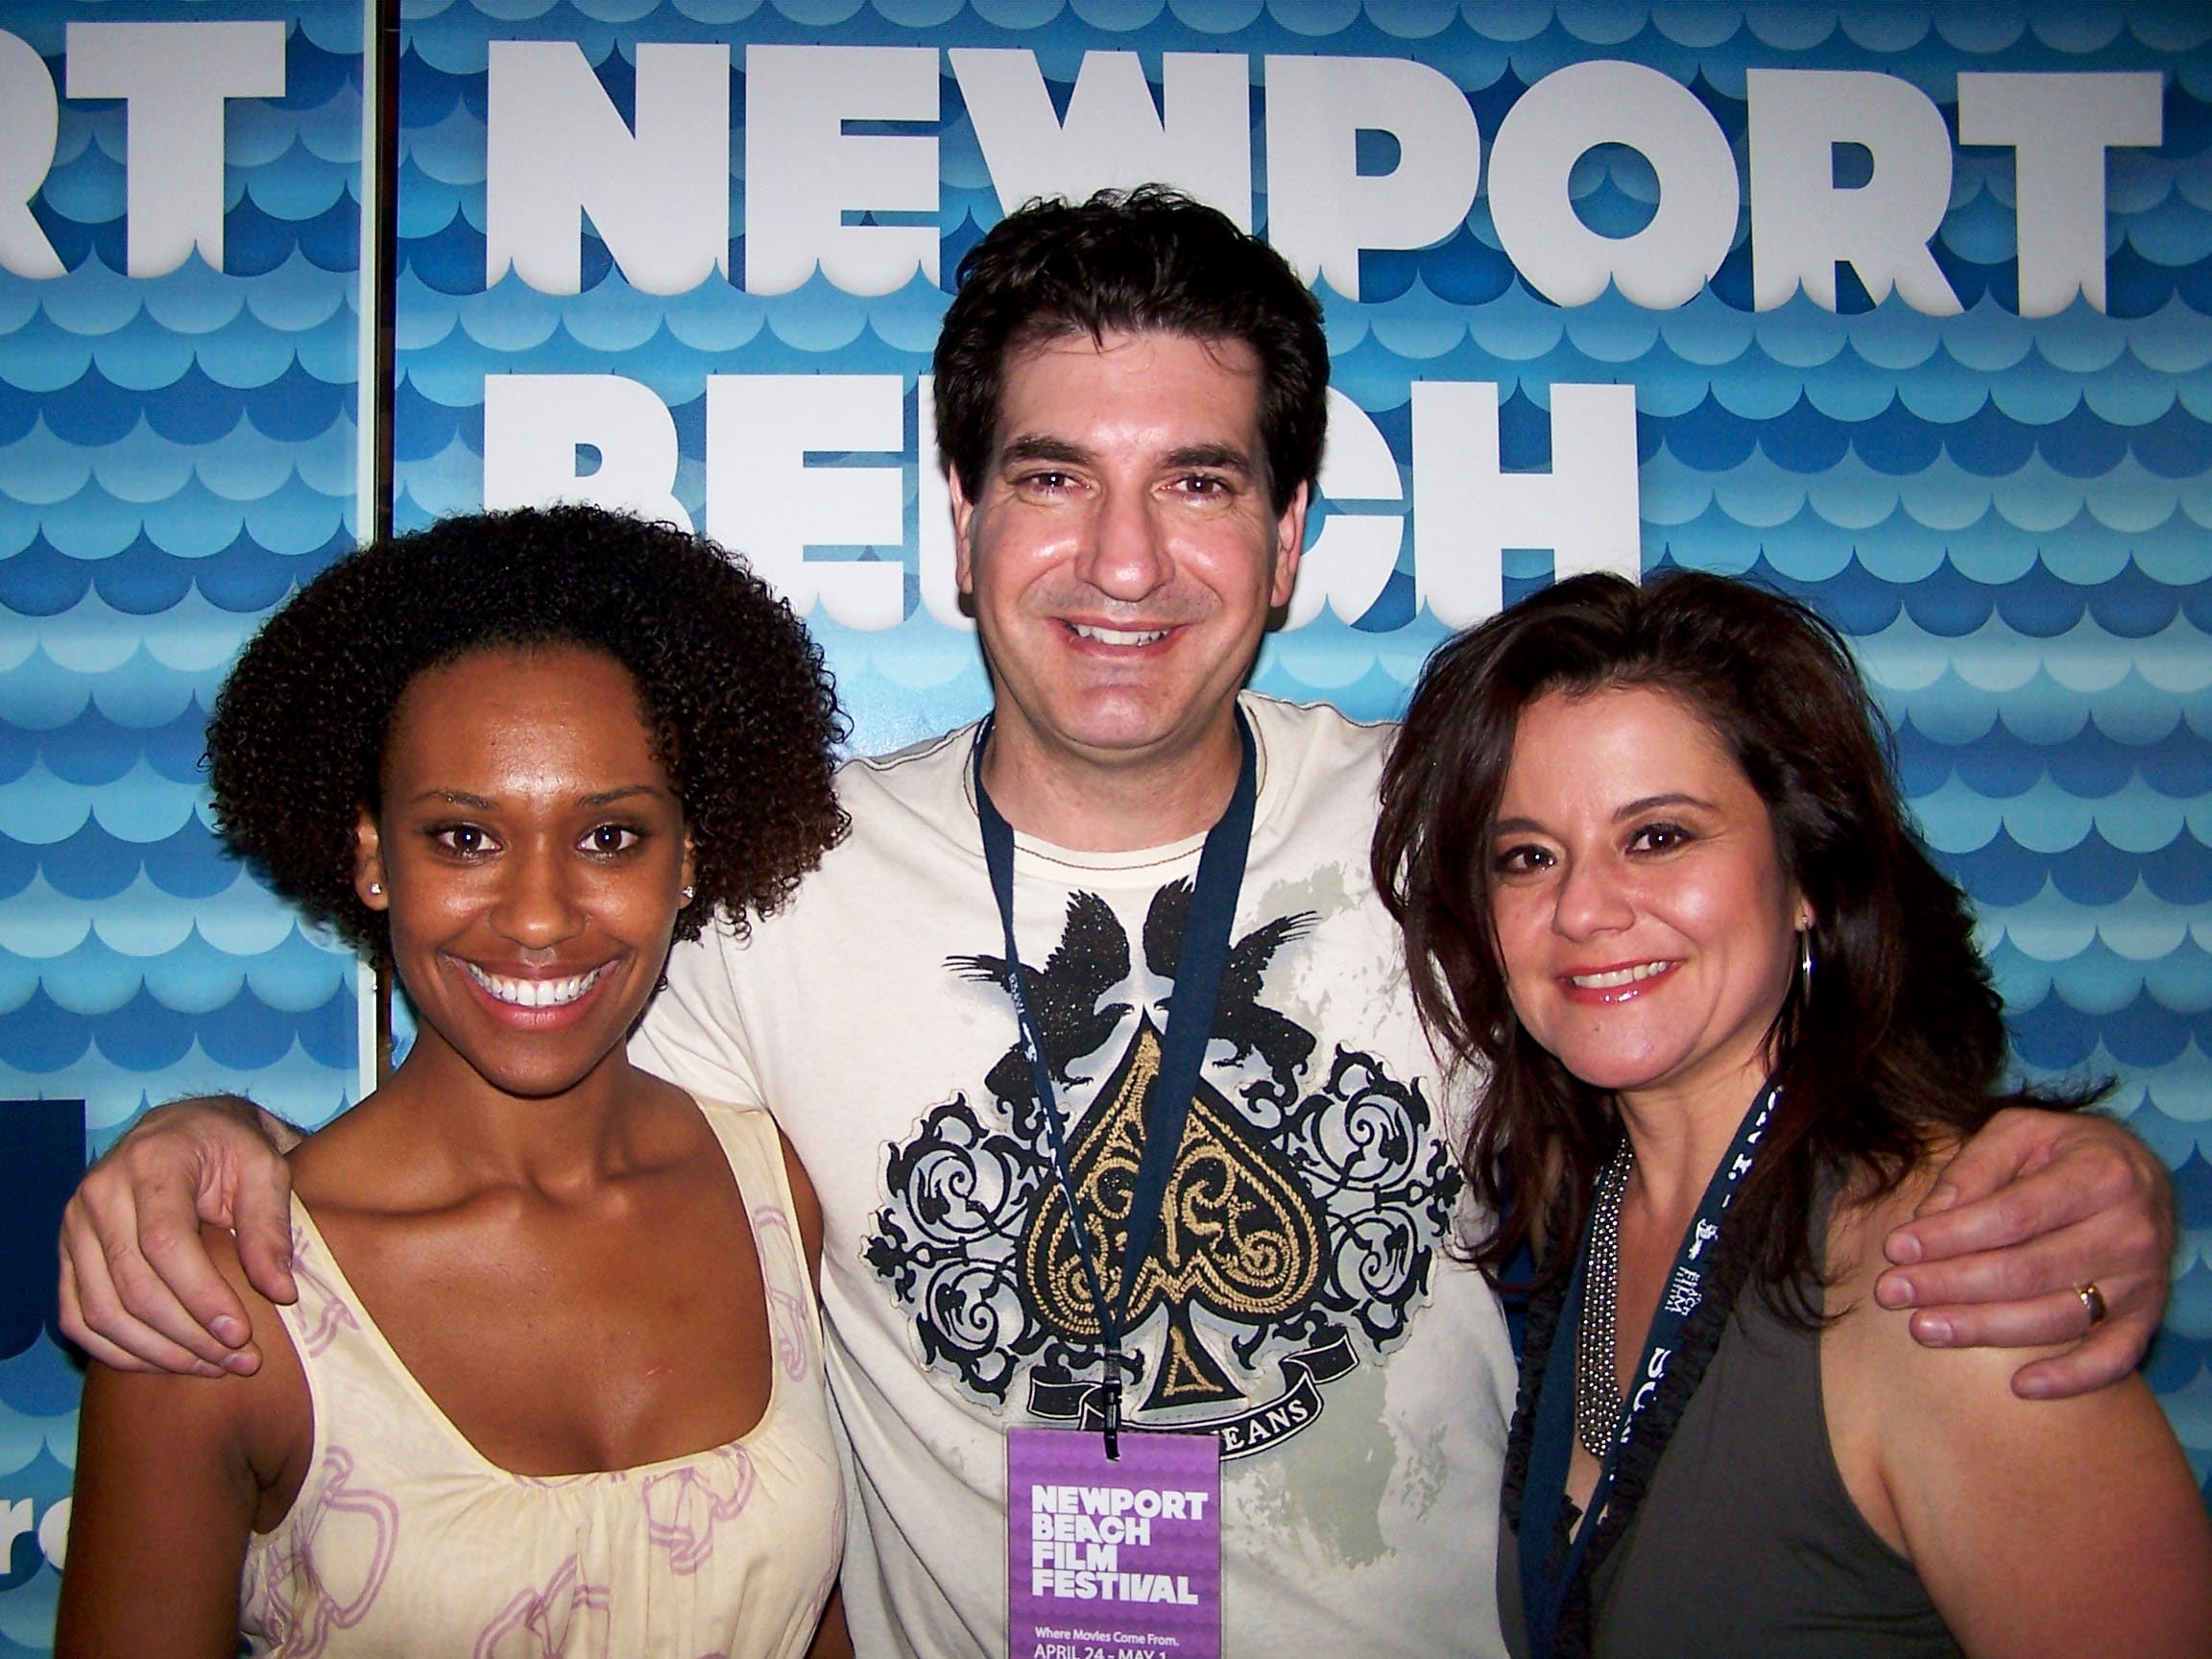 Director David Asmussen with actress Ryan Michelle Bathe and Executive Producer Sylvia Asmussen at the screening of April Moon at the Newport Beach Film Festival.